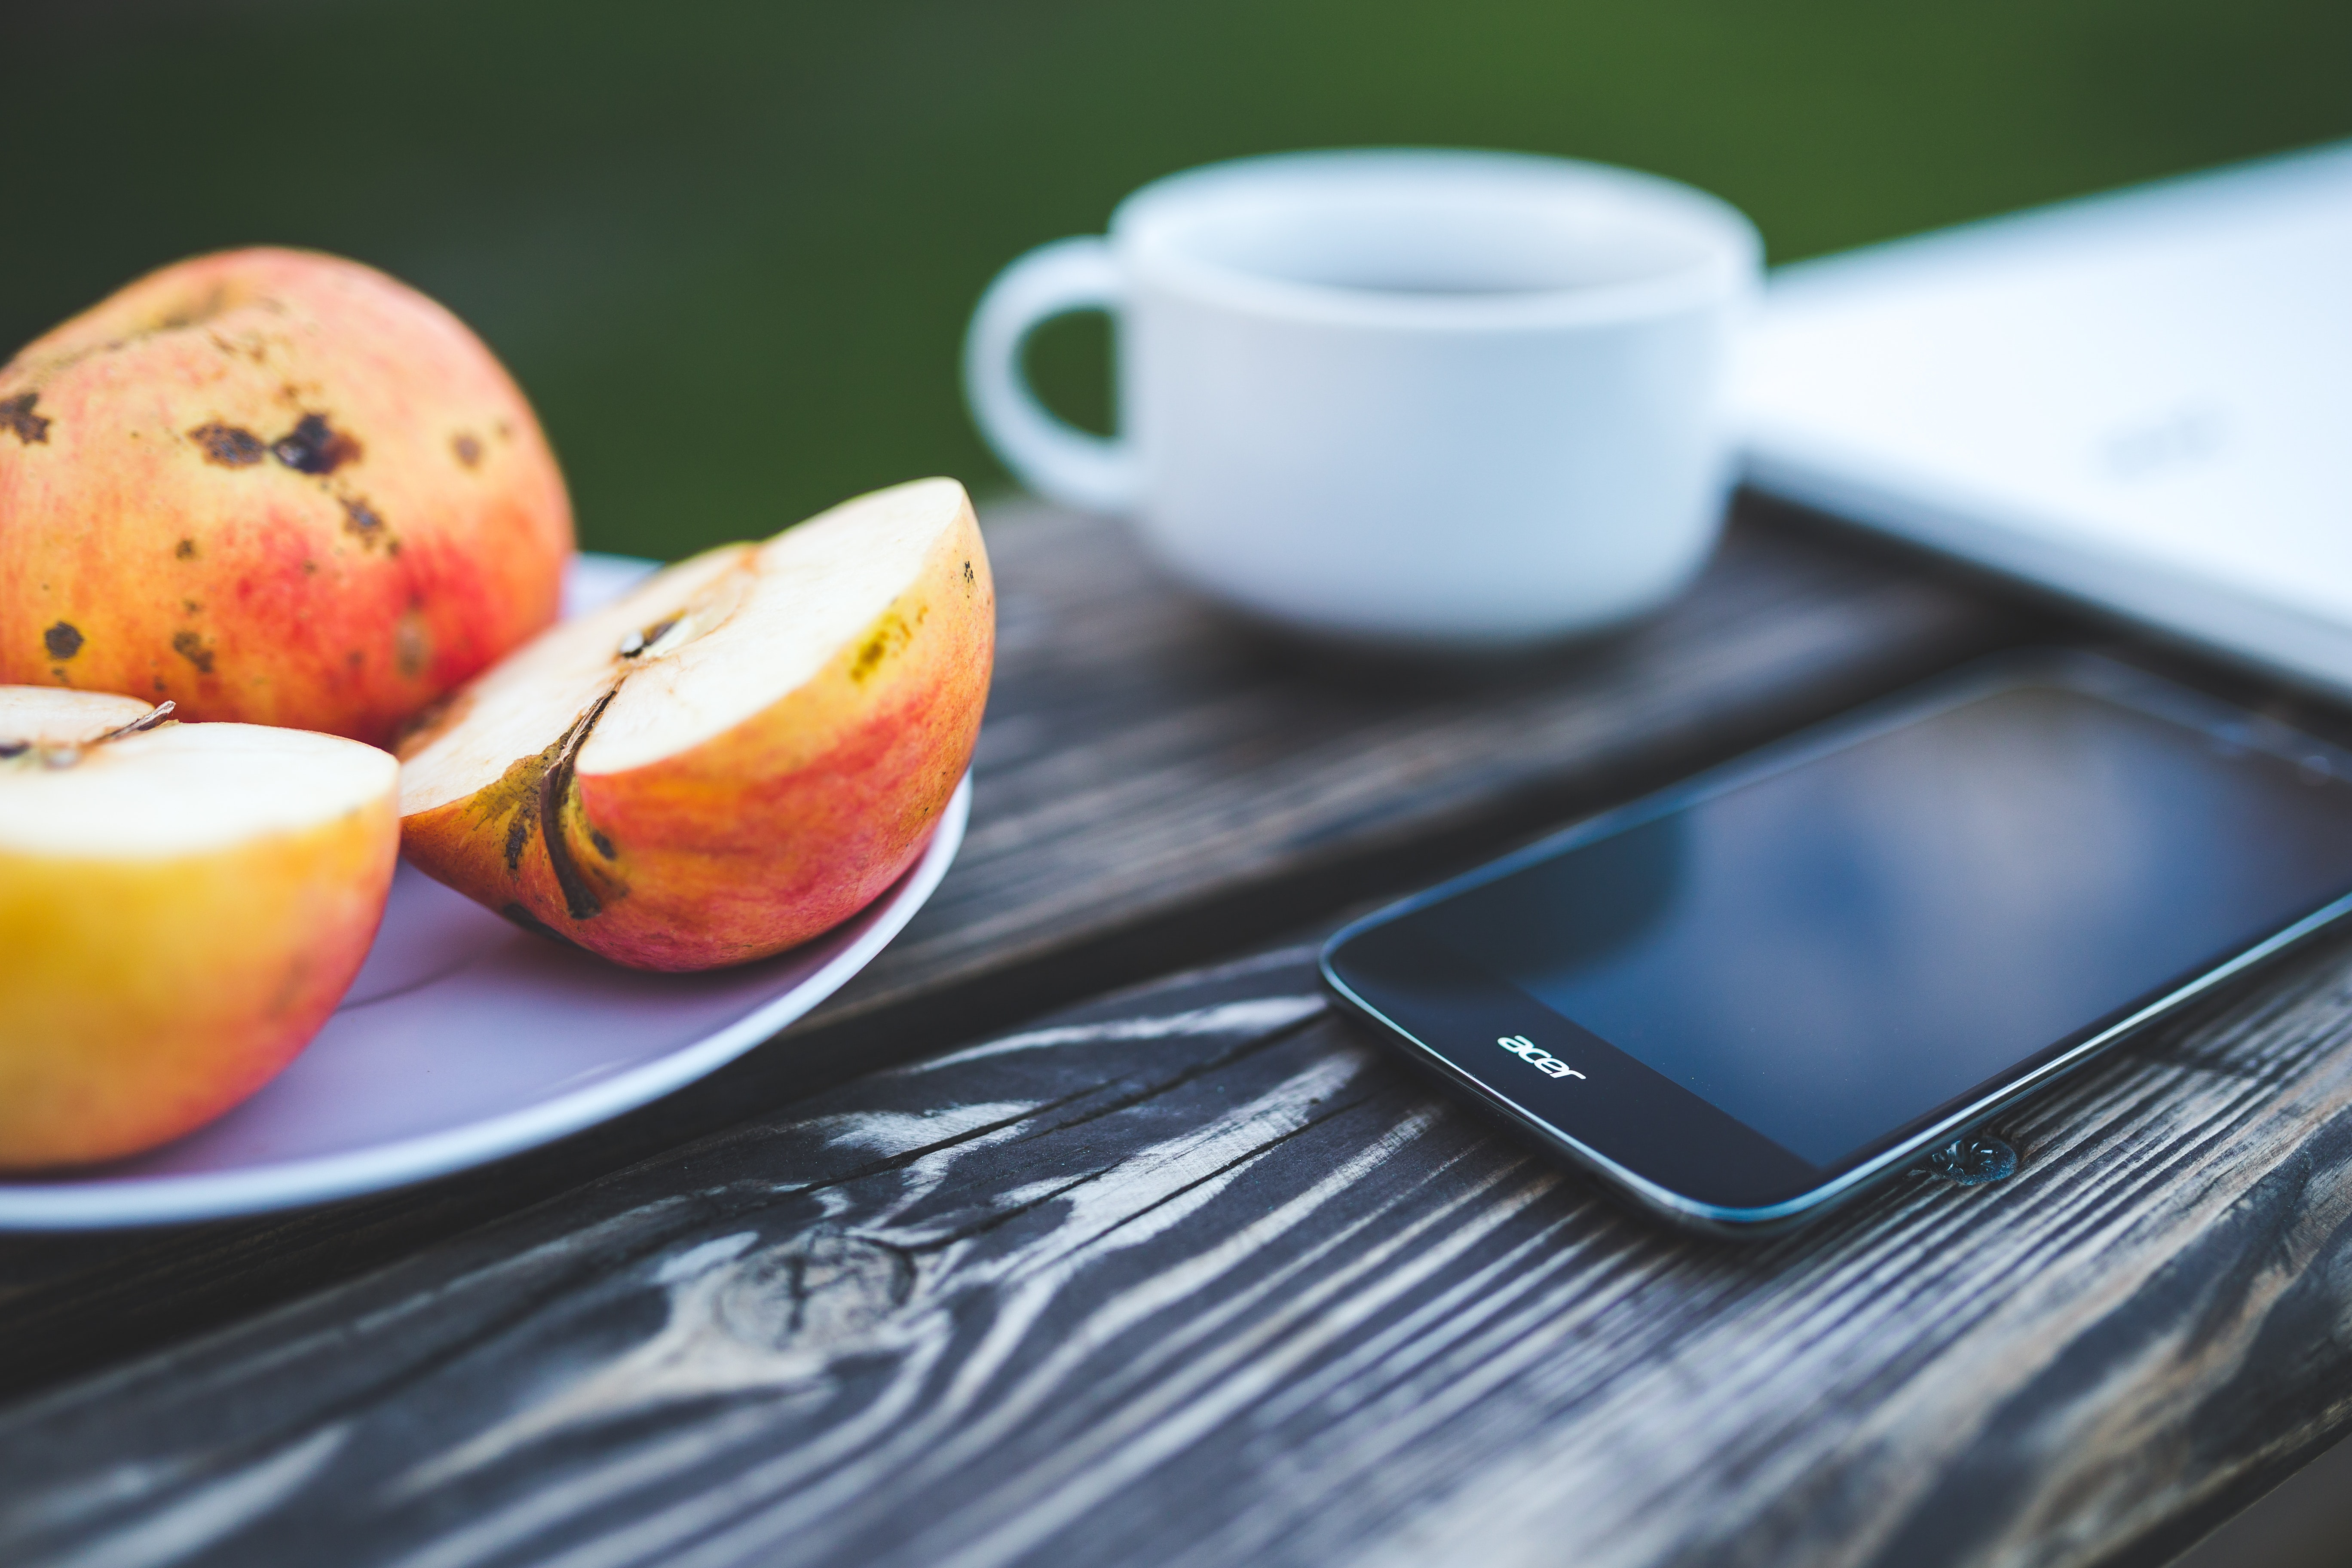 Mobile phone, apple, coffee on the wooden table photo